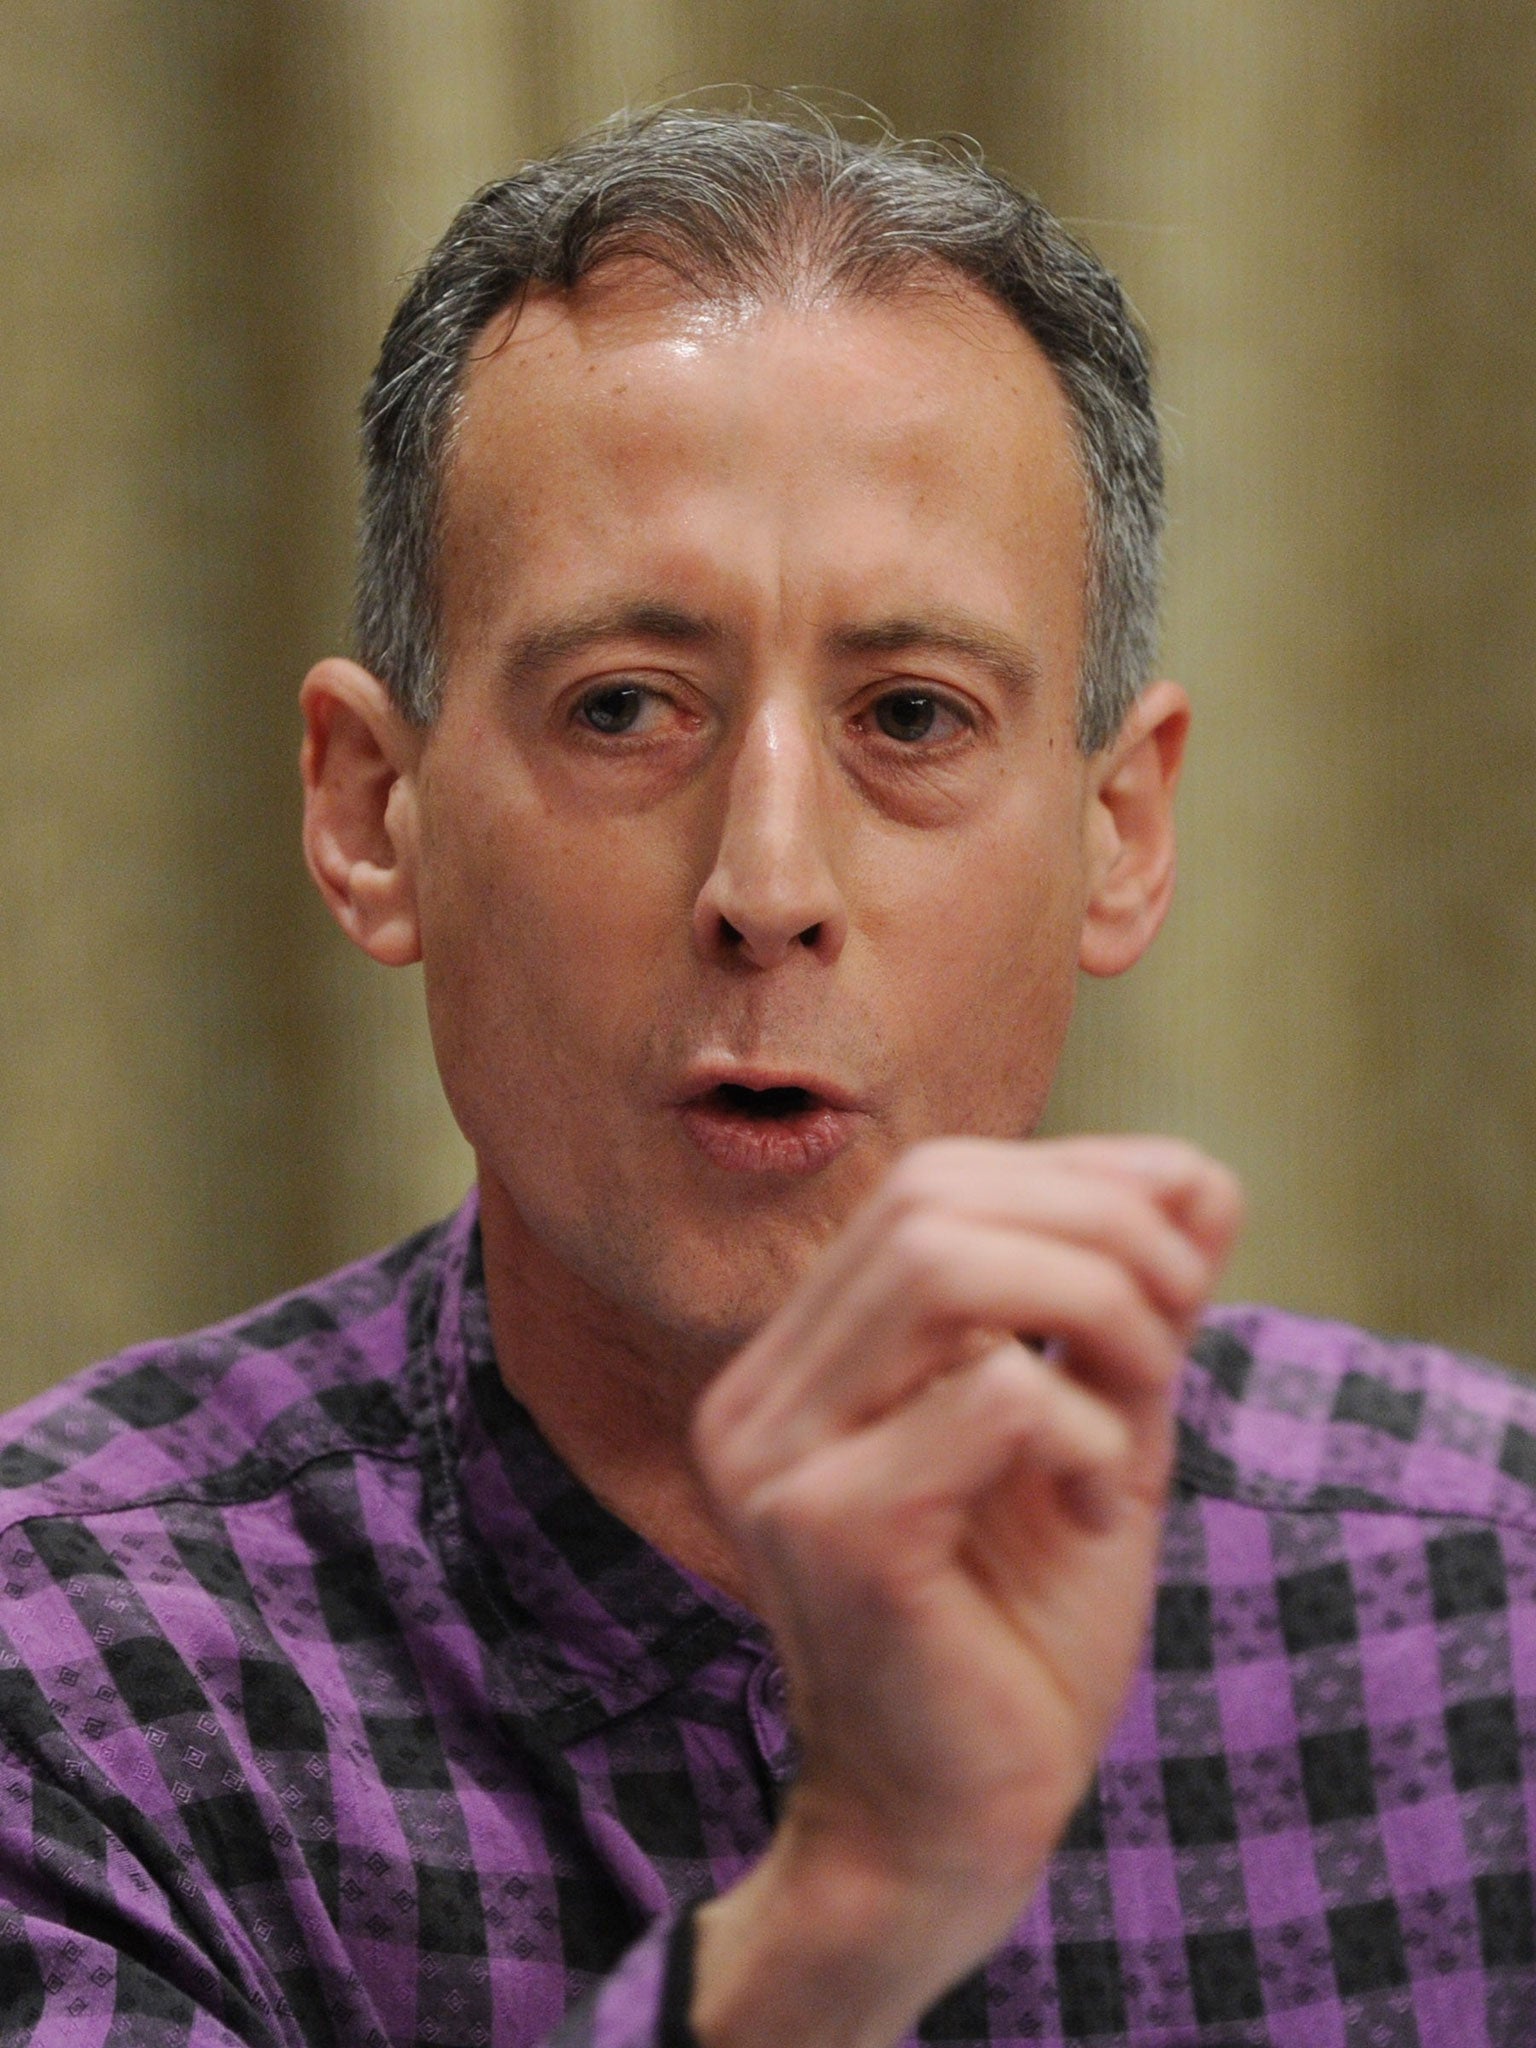 Campaigner Peter Tatchell has spoken against the resurgence of the language used under section 28